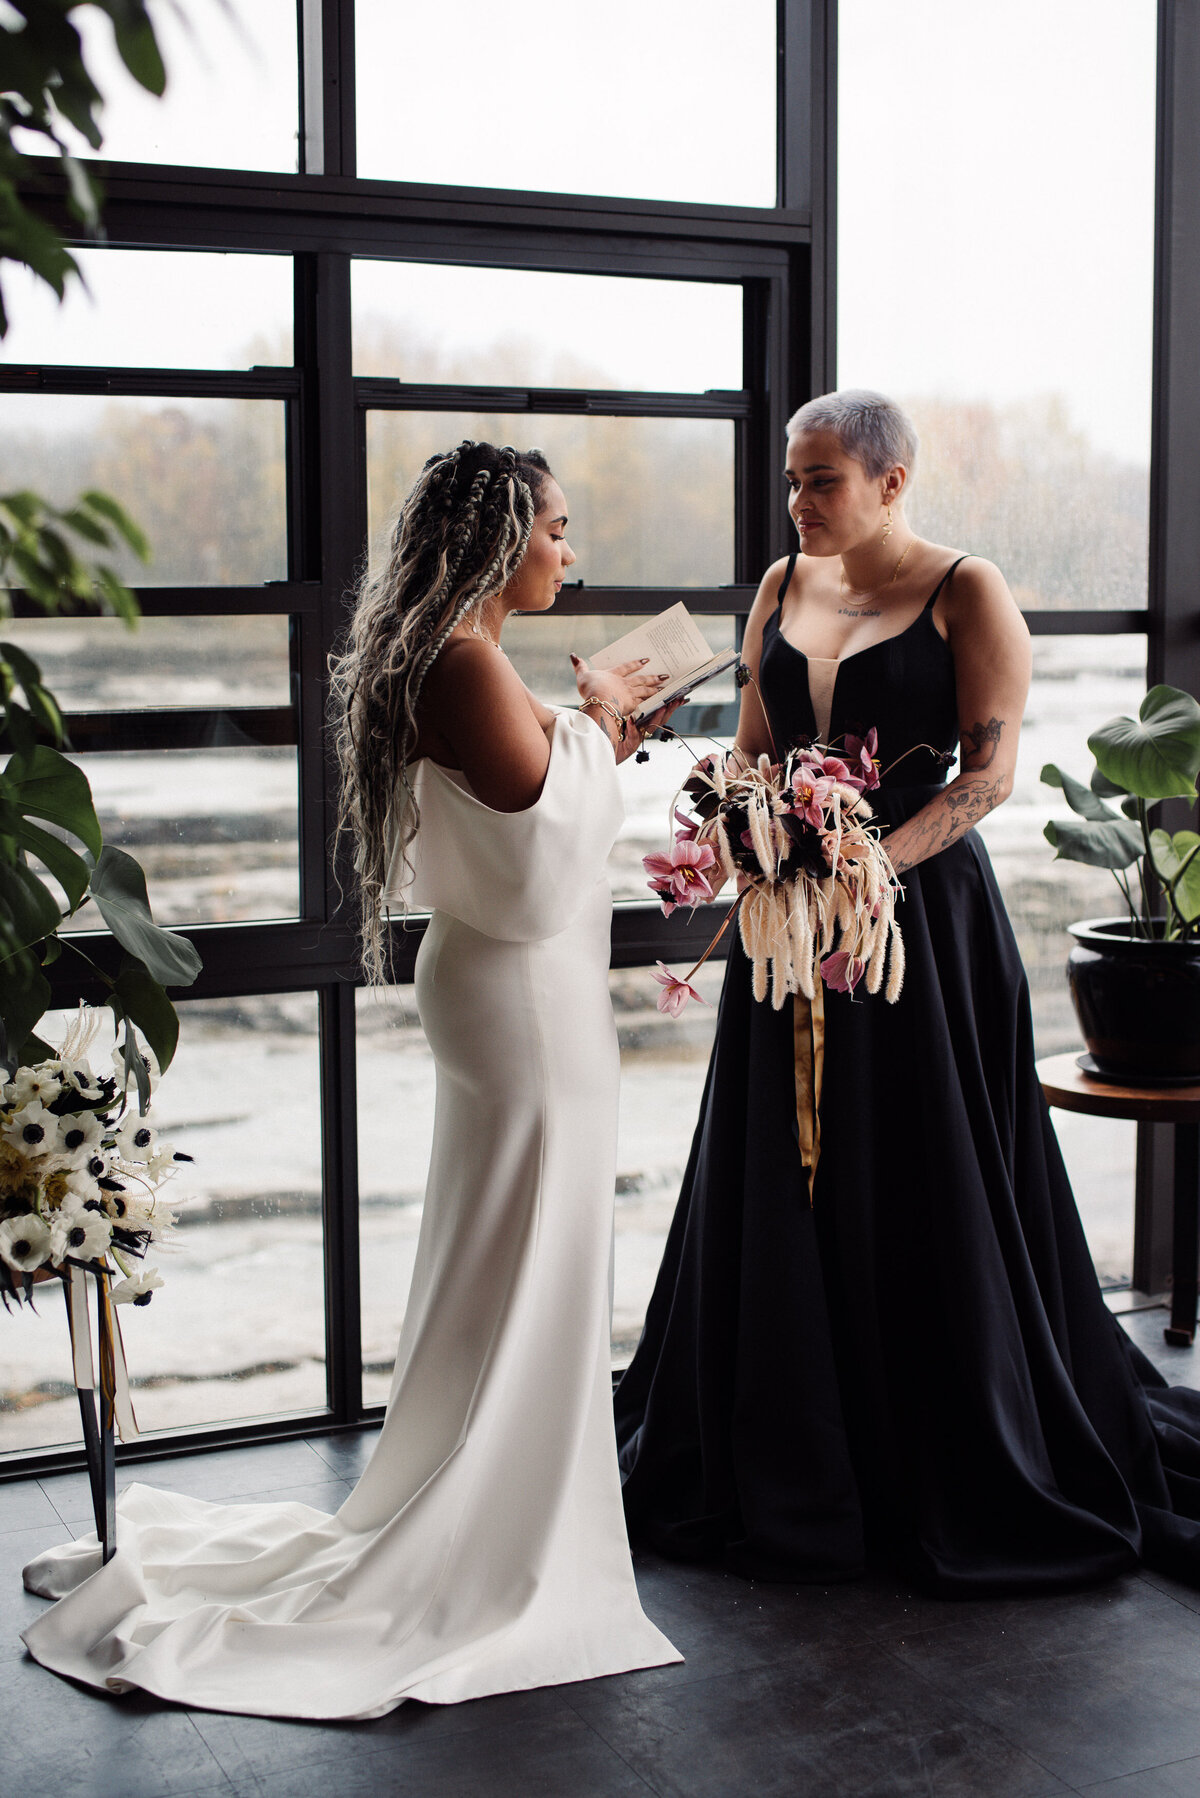 black and white wedding dress for modern LGBTQ couples